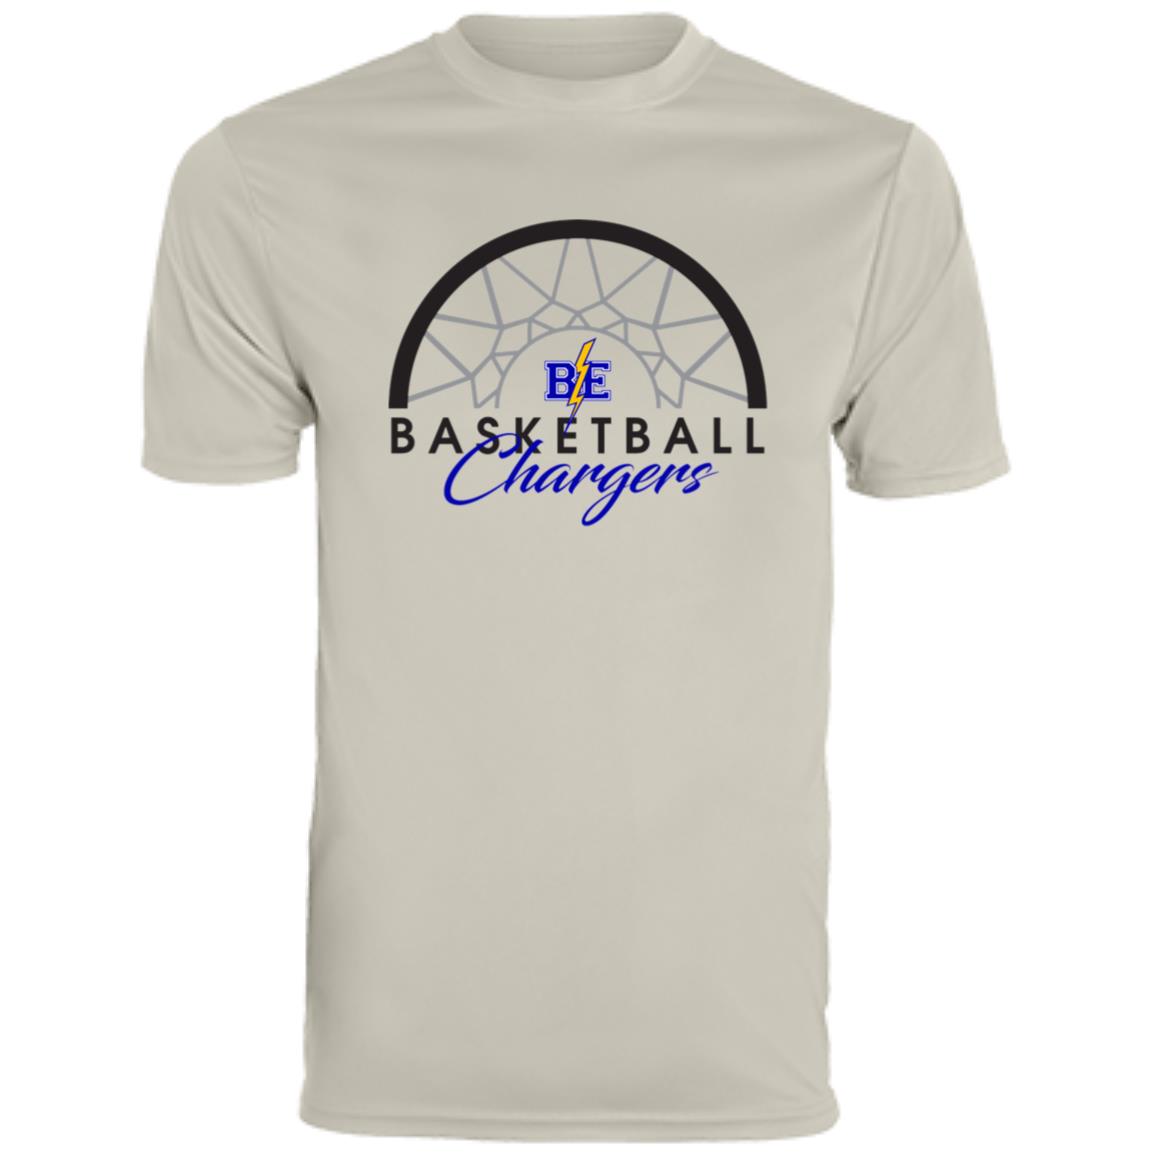 Chargers Basketball - Men's Moisture-Wicking Tee